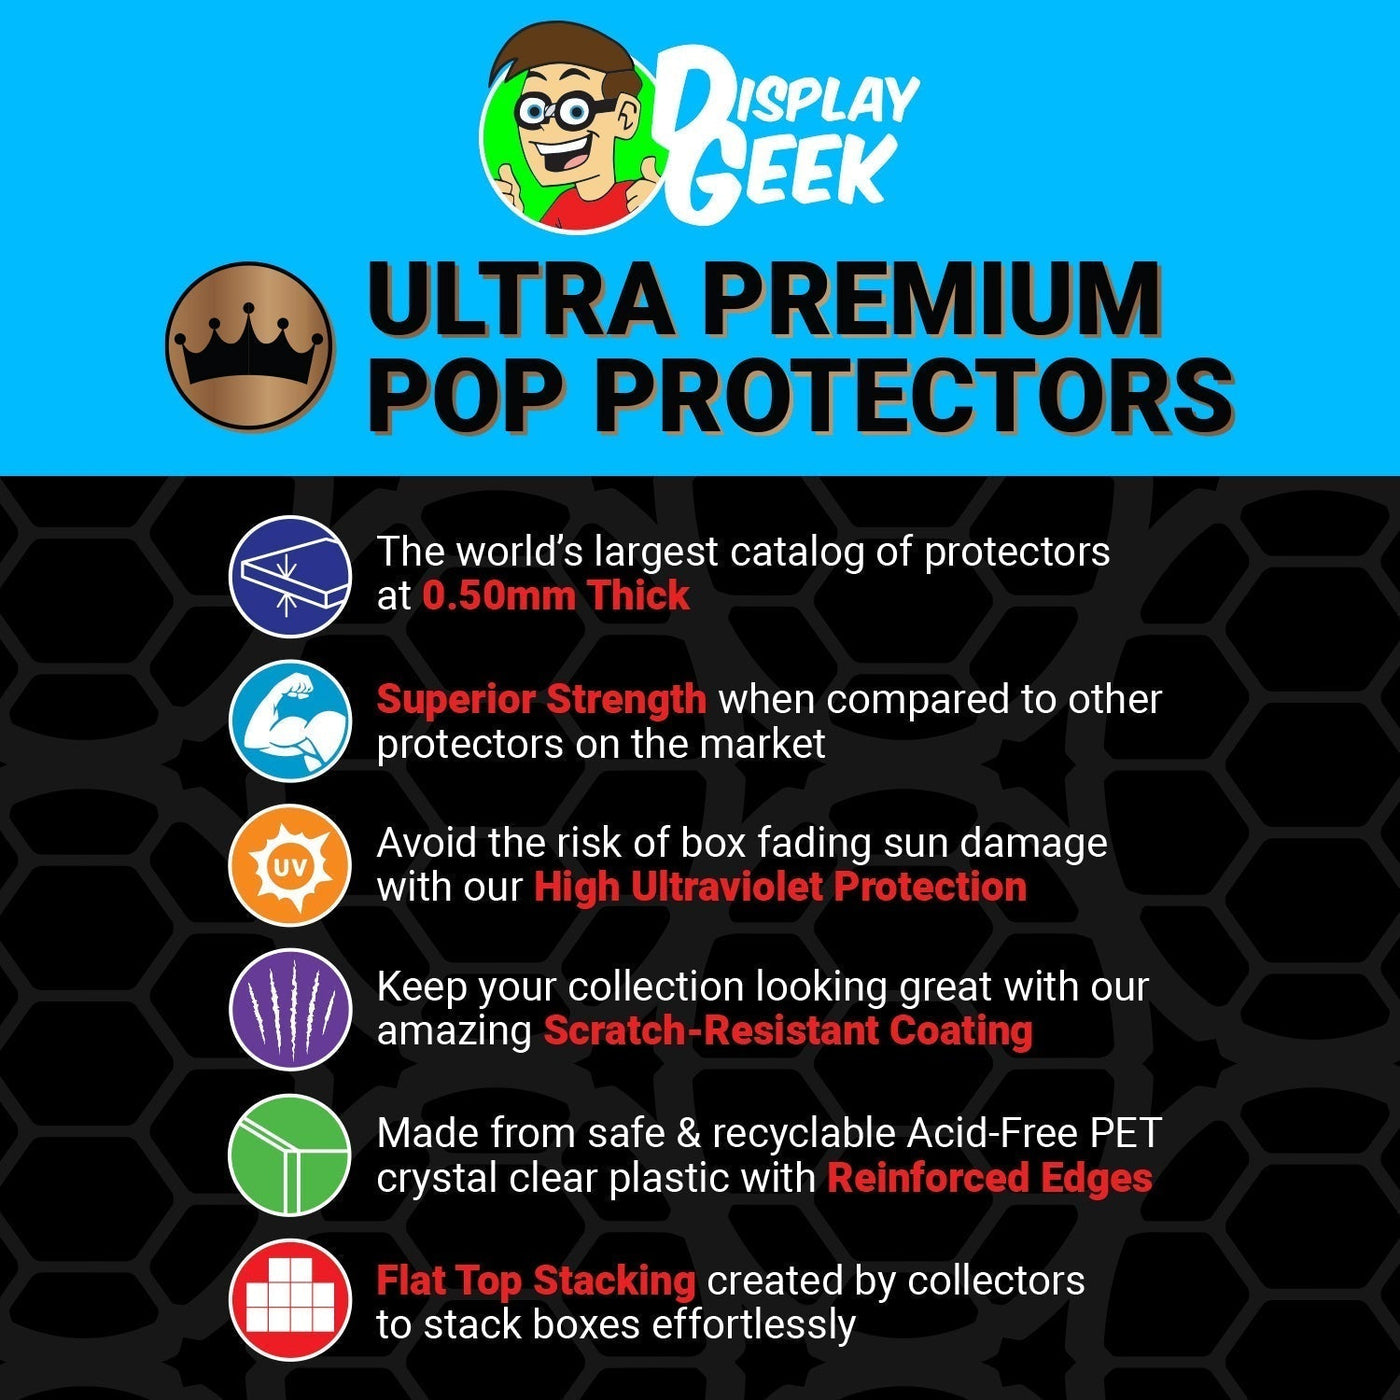 Pop Protector for Bounty Hunters Collection IG-88 #438 Funko Pop Deluxe on The Protector Guide App by Display Geek